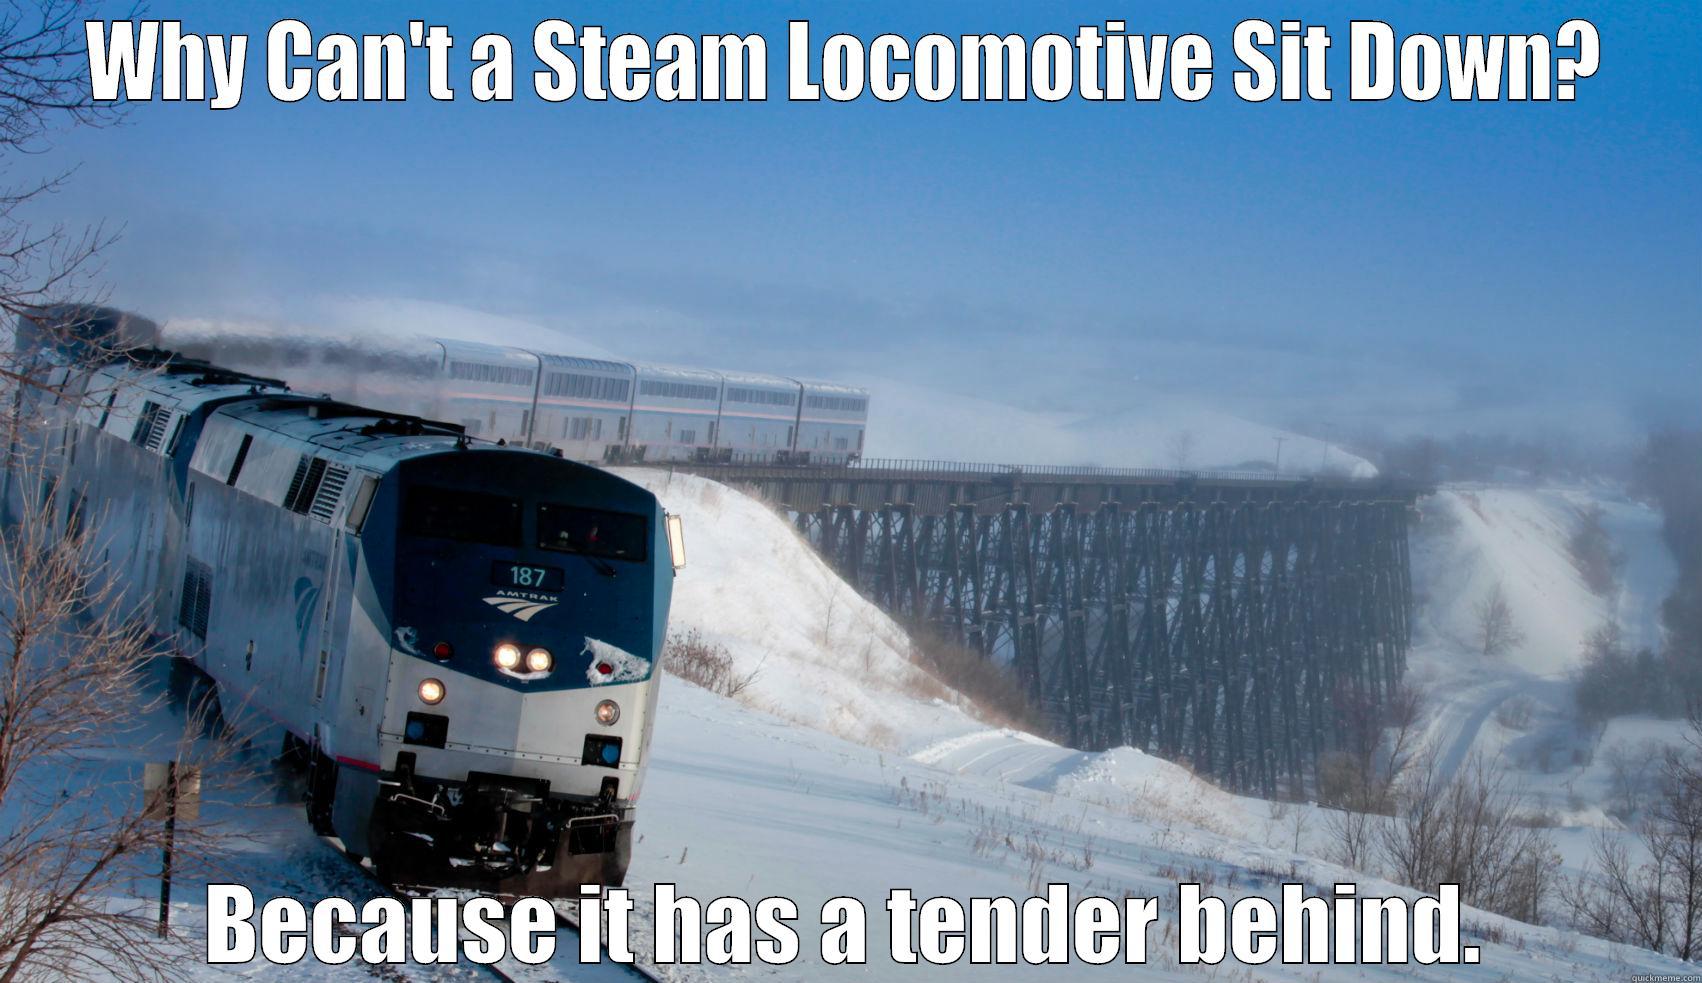 WHY CAN'T A STEAM LOCOMOTIVE SIT DOWN? BECAUSE IT HAS A TENDER BEHIND. Misc